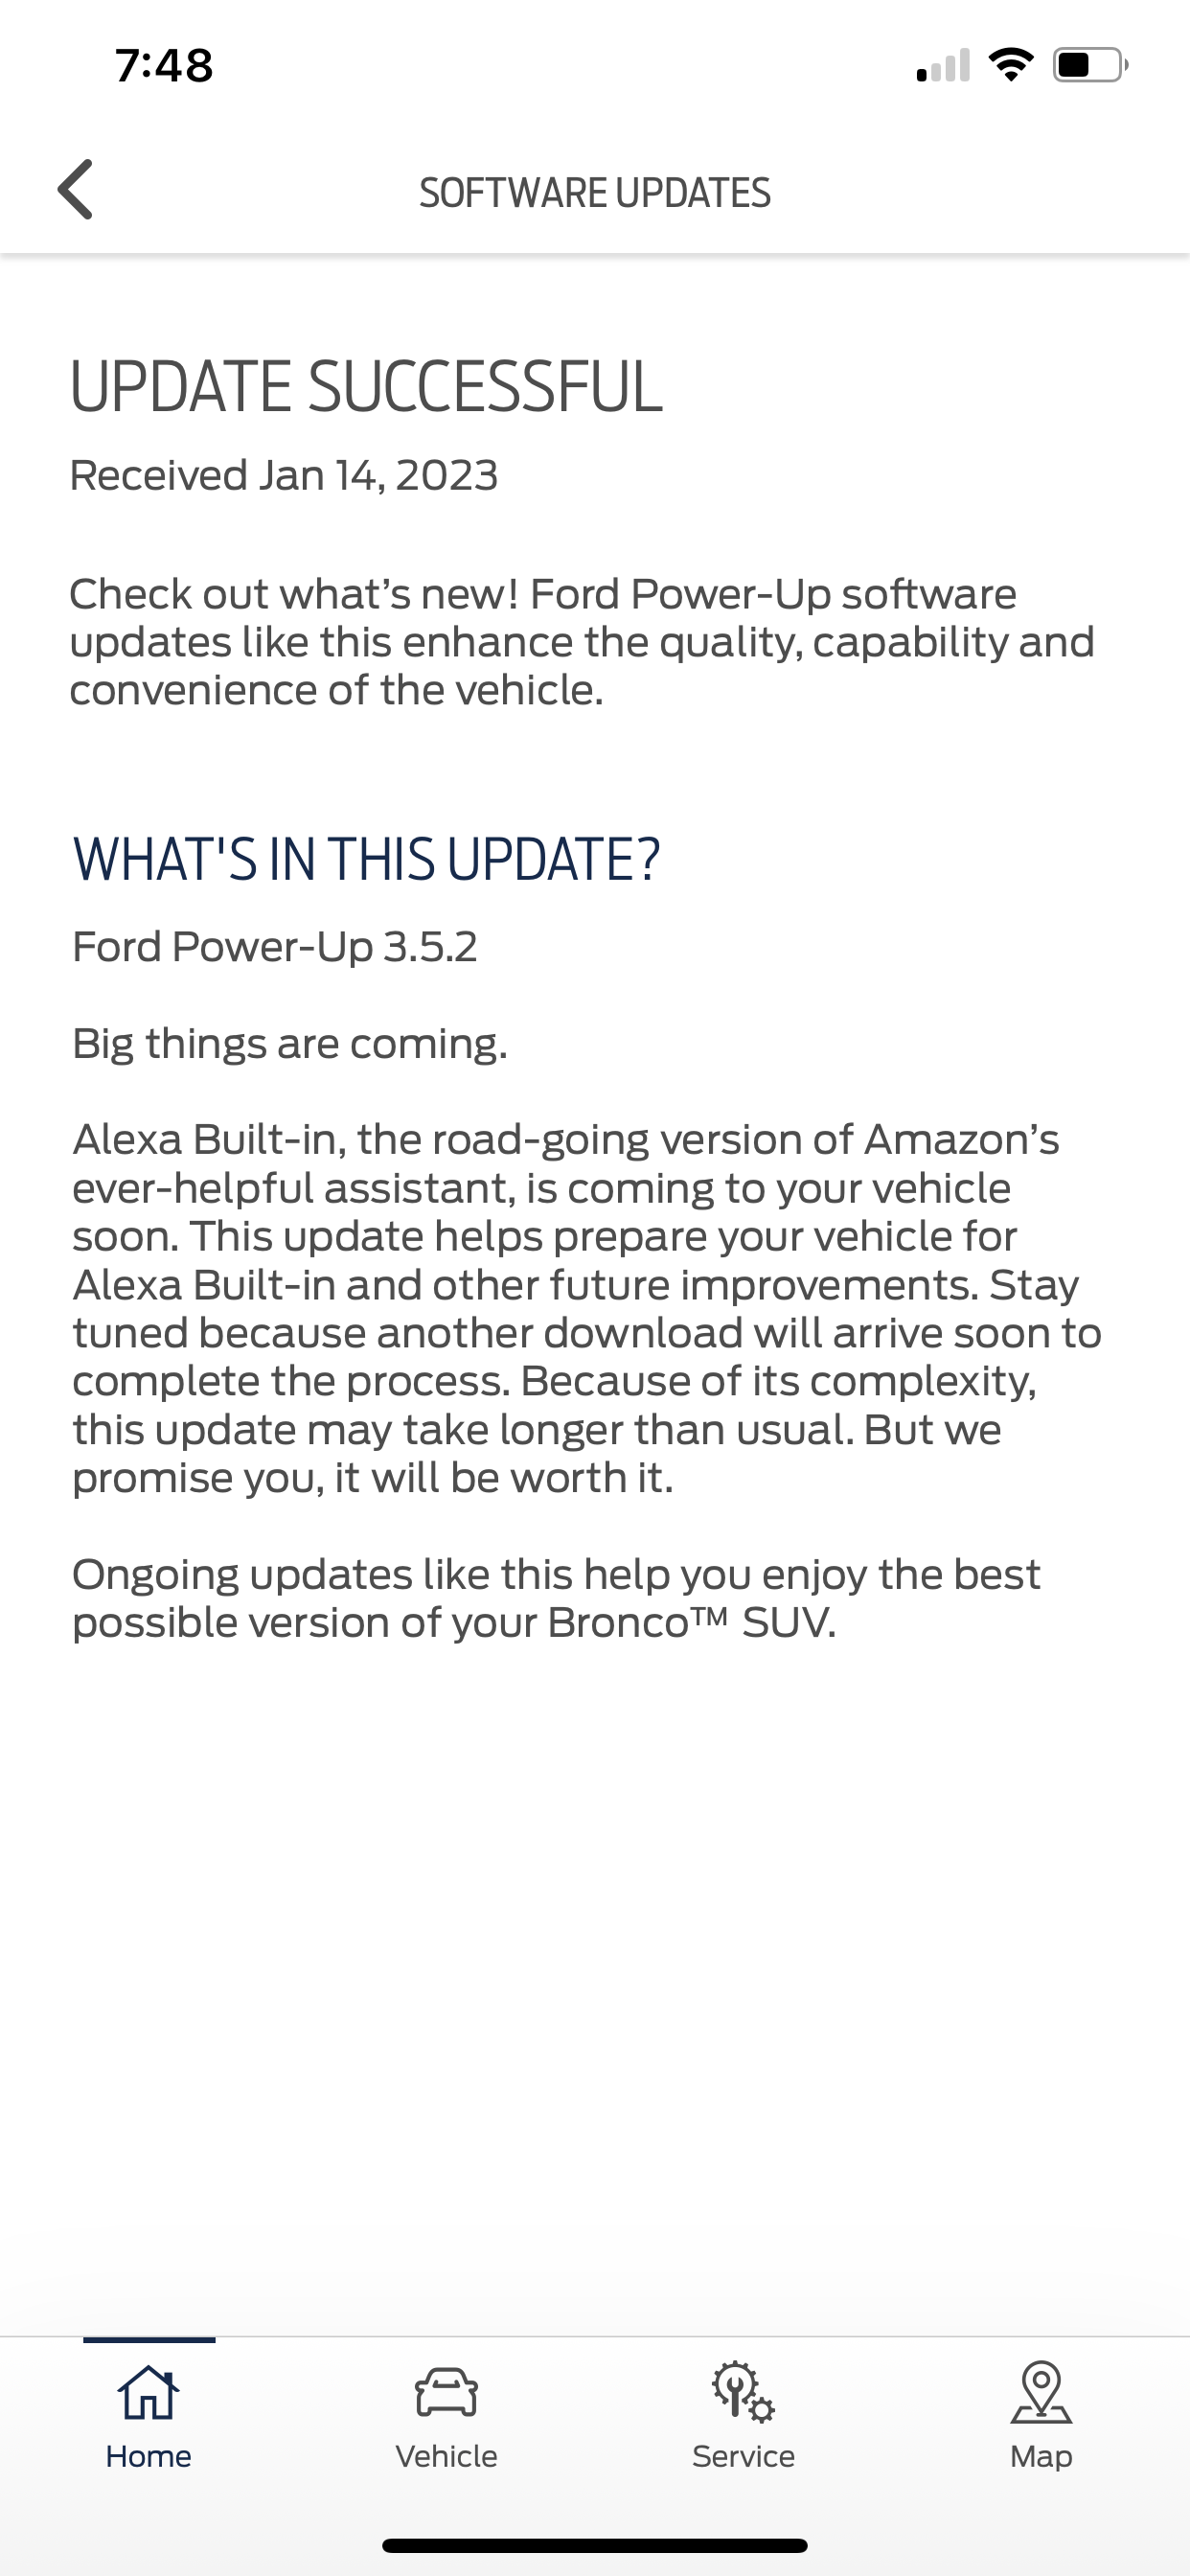 Ford Bronco How to never miss a OTA software update! [Instructions] 1E11EFDC-9ACC-4E85-85BA-5A9A0D6D621F